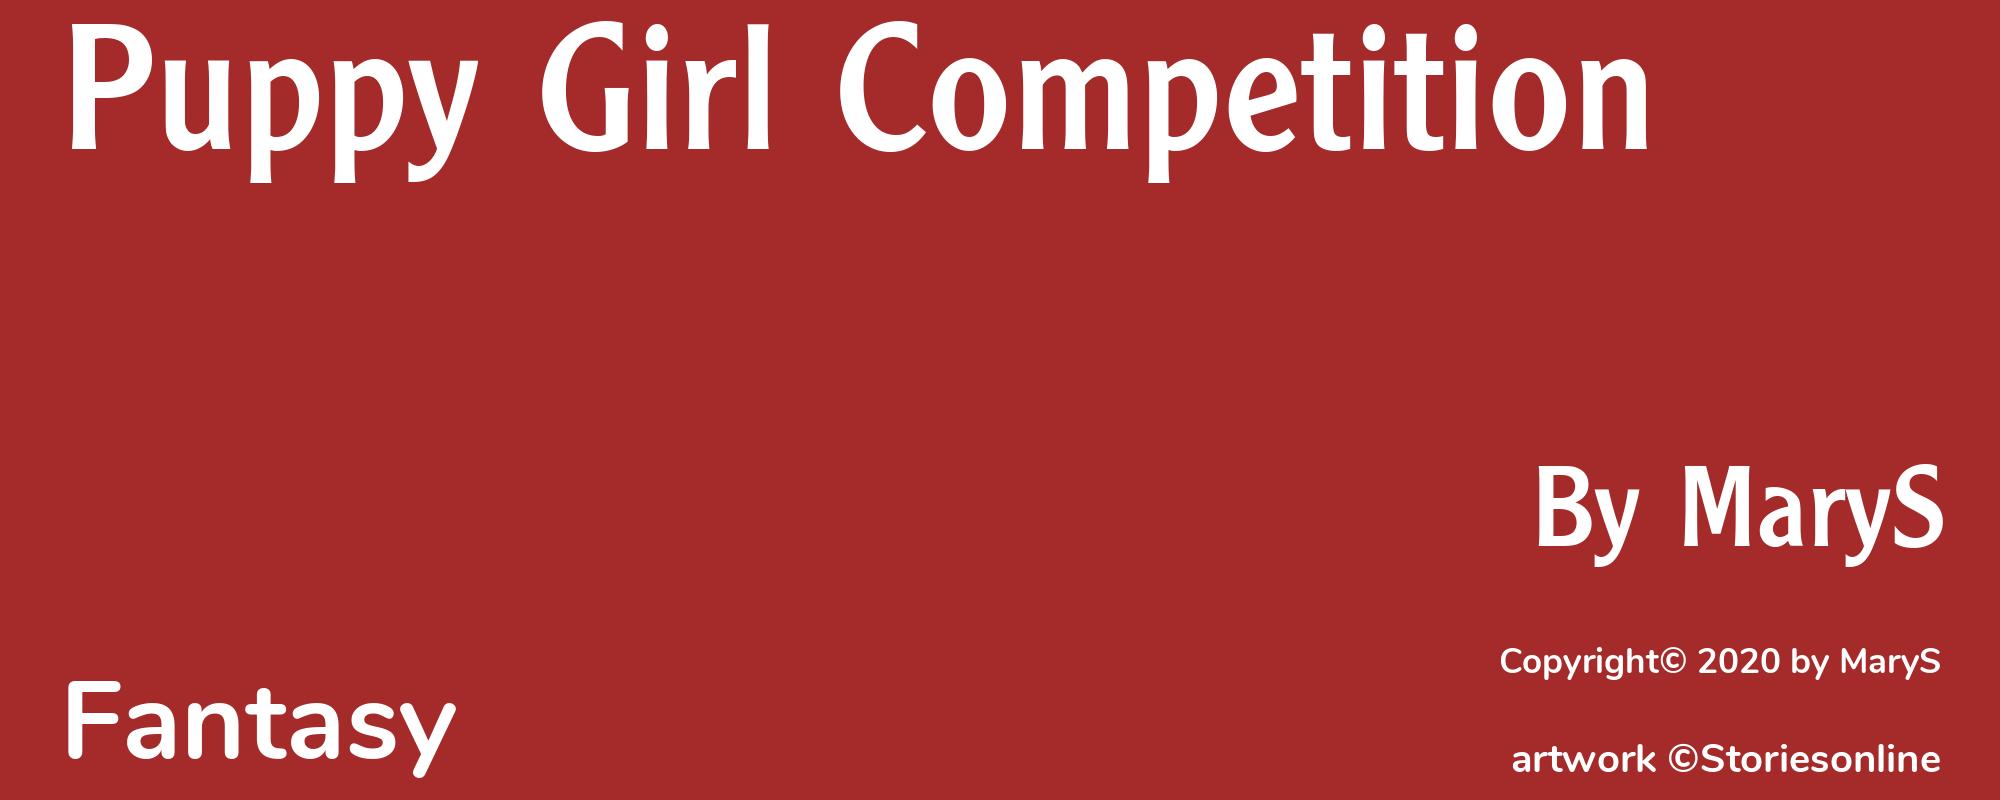 Puppy Girl Competition - Cover